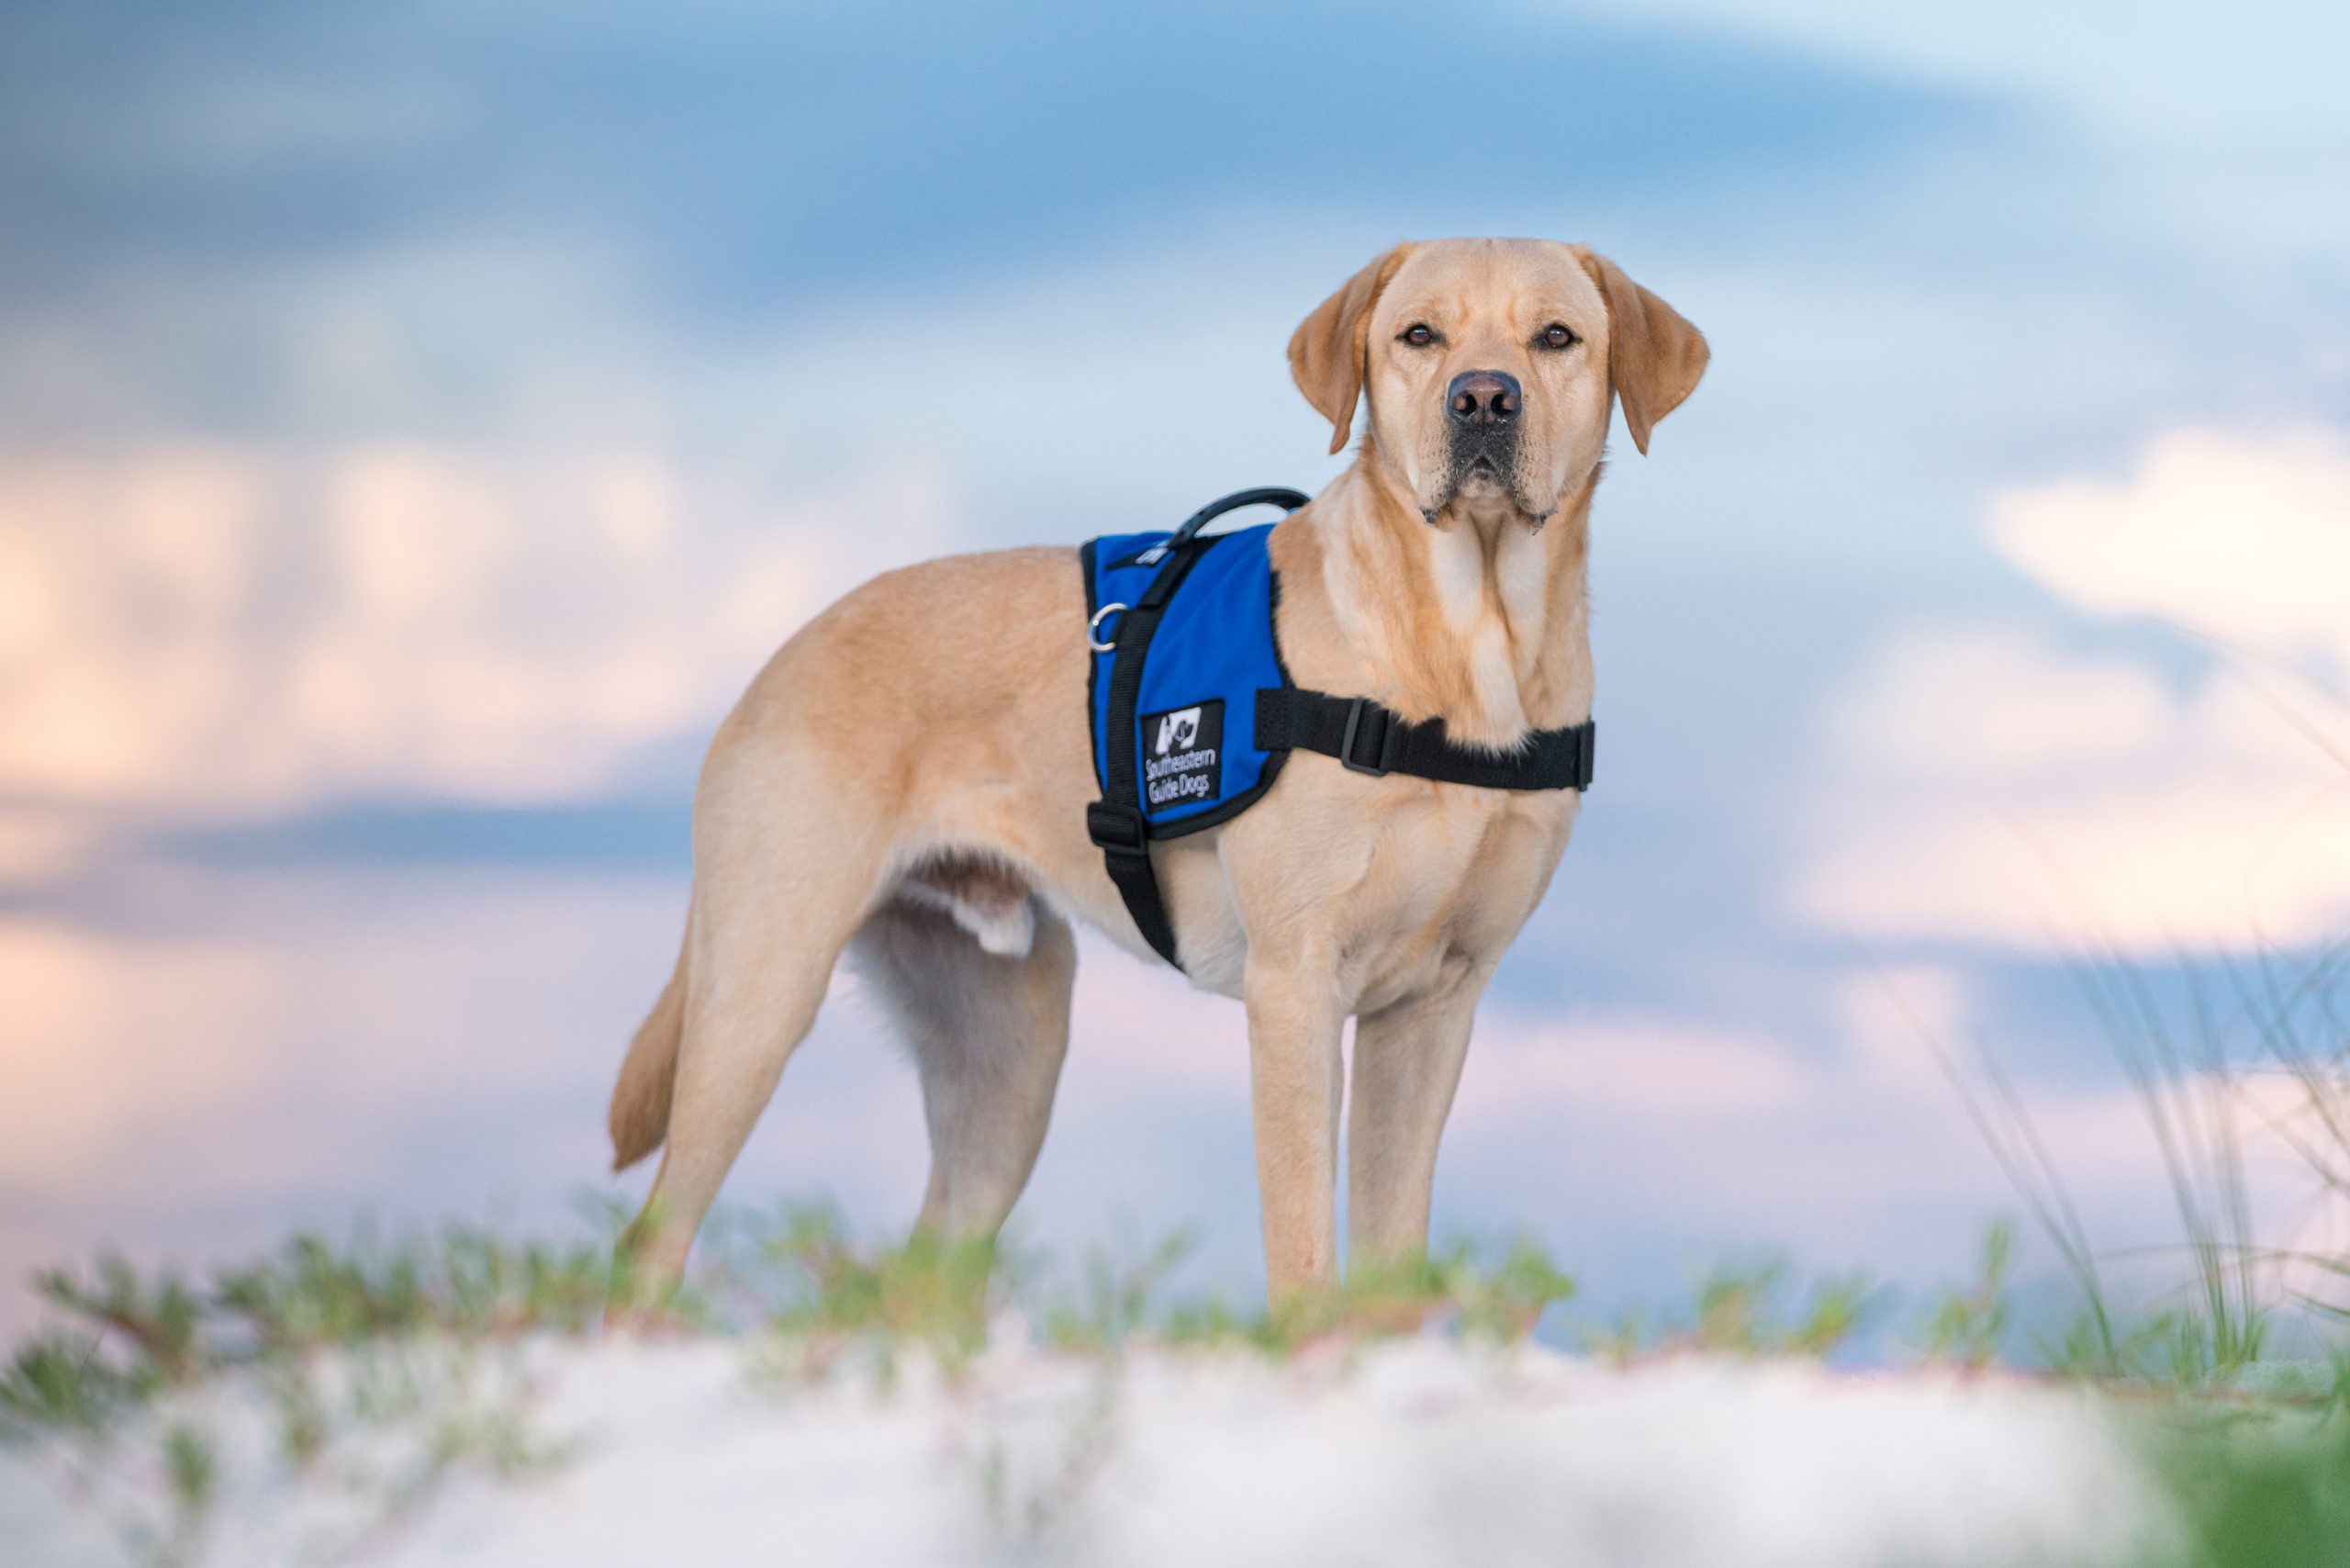 A yellow lab service dog in vest looks at the camera and stand on the beach